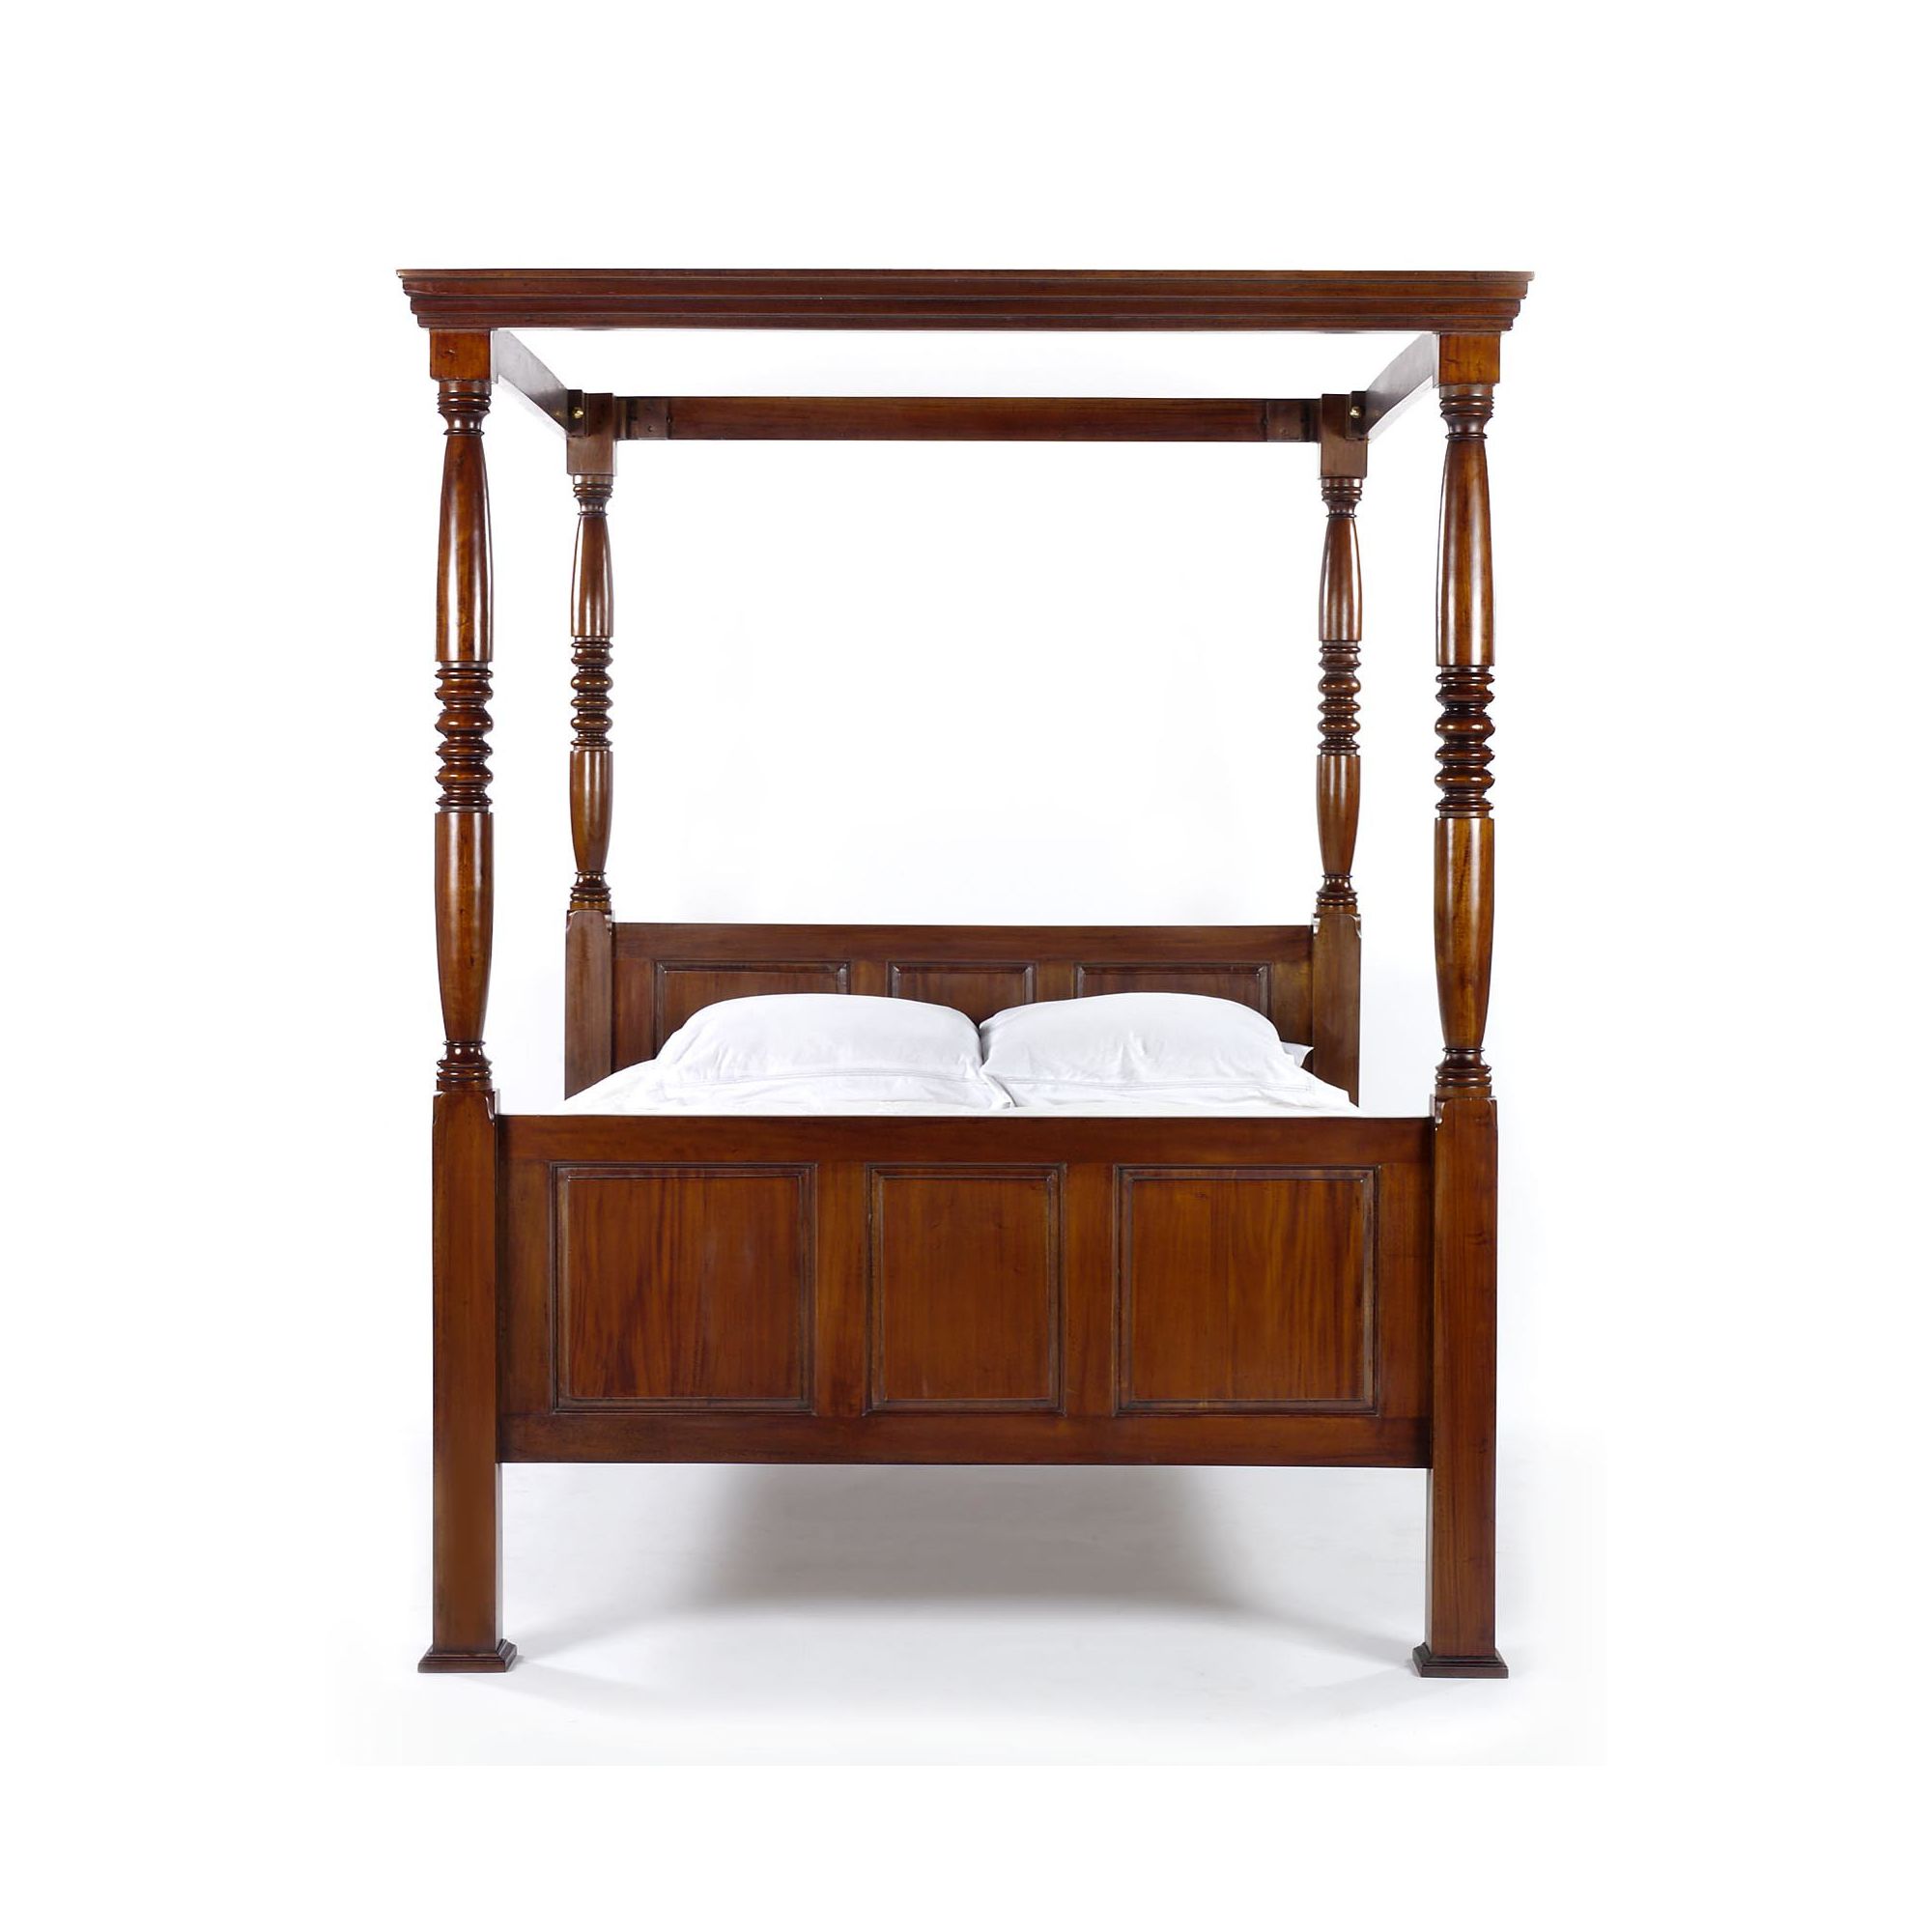 Anderson Bradshaw Jacobean Four Poster Bed Frame - King at Tesco Direct